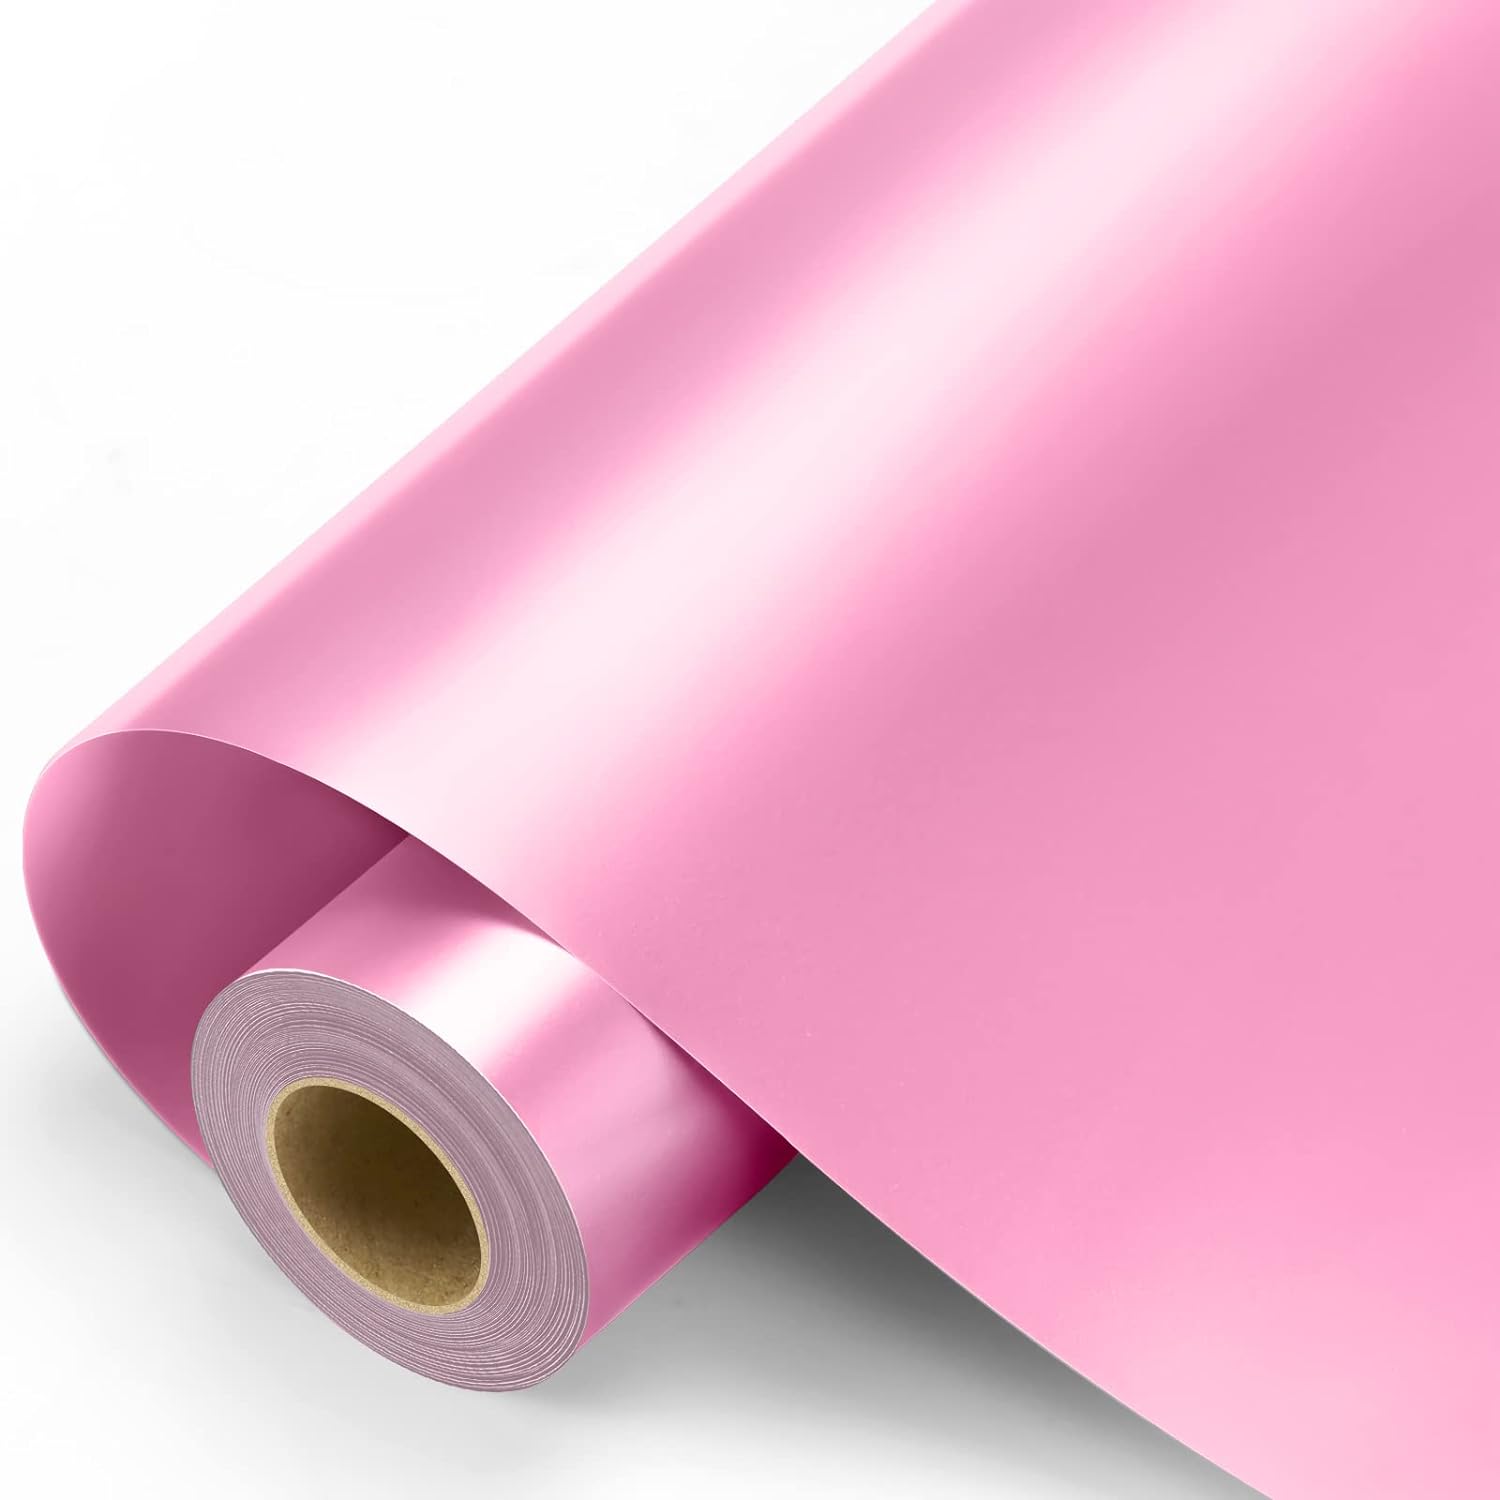 Pink Permanent Vinyl - 12x11FT Pink Adhesive Vinyl Roll for All Cutting Machine, Permanent Outdoor Vinyl for Decor Sticker, Car Decal, Scrapbooking, Signs, Glossy & Waterproof